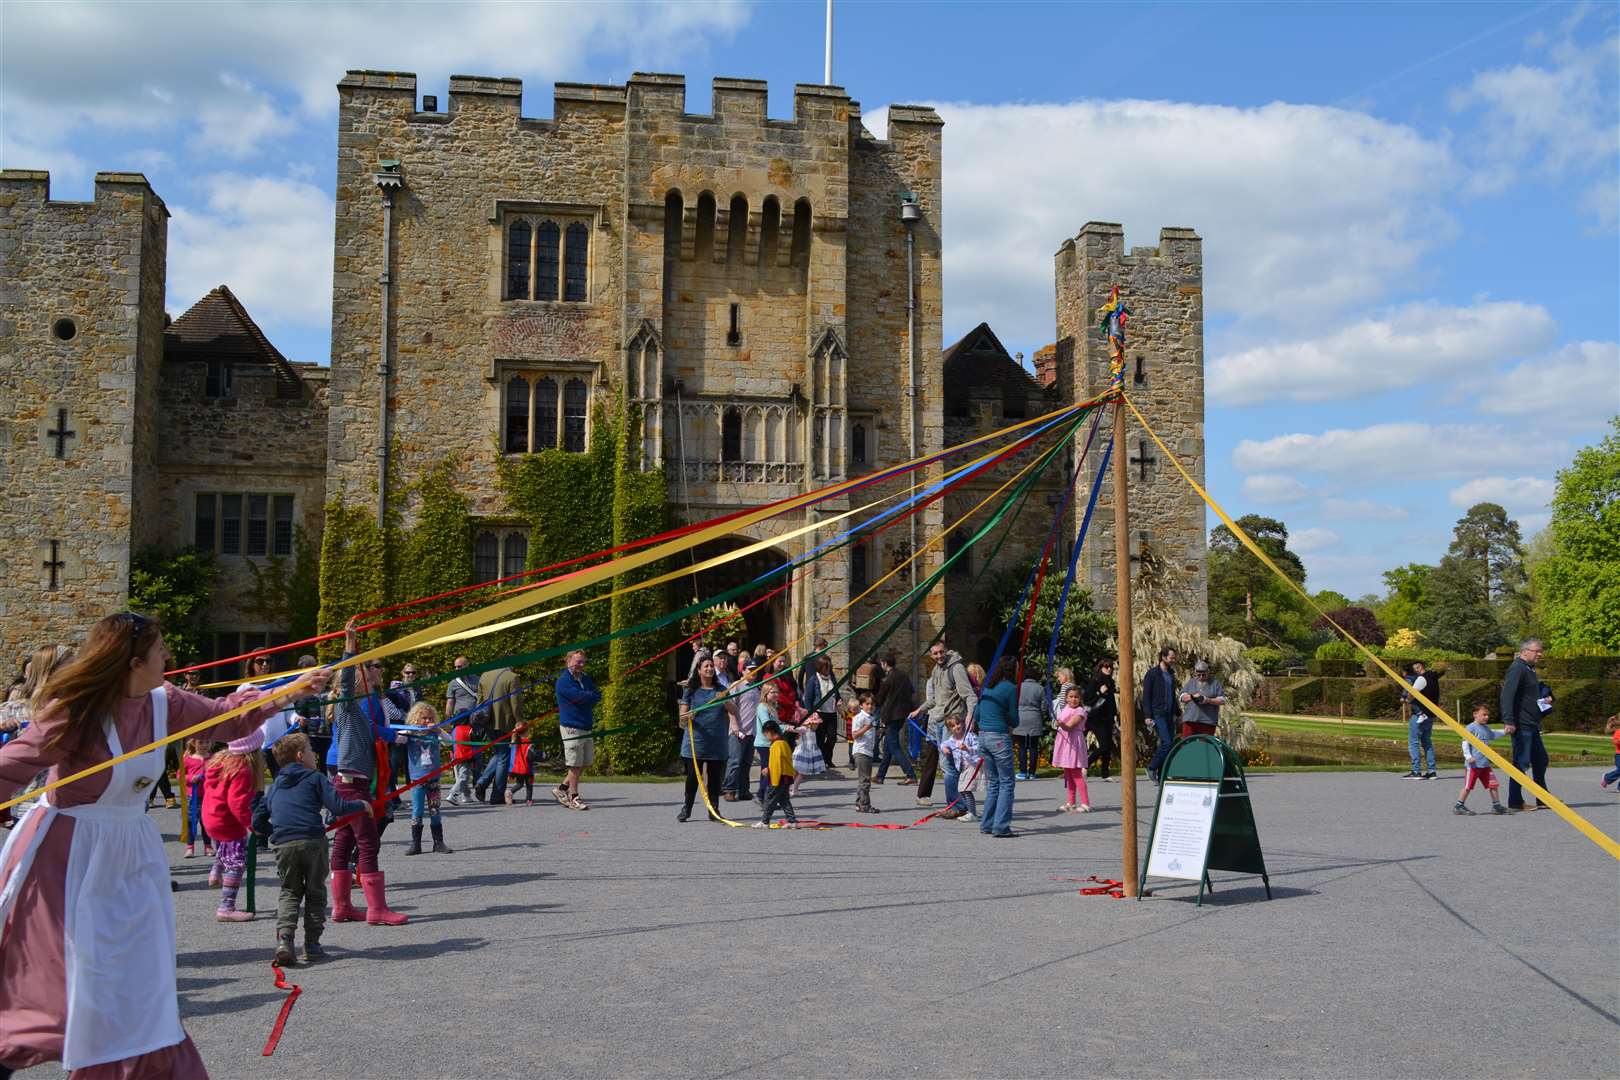 Visitors can join in the Maypole dancing